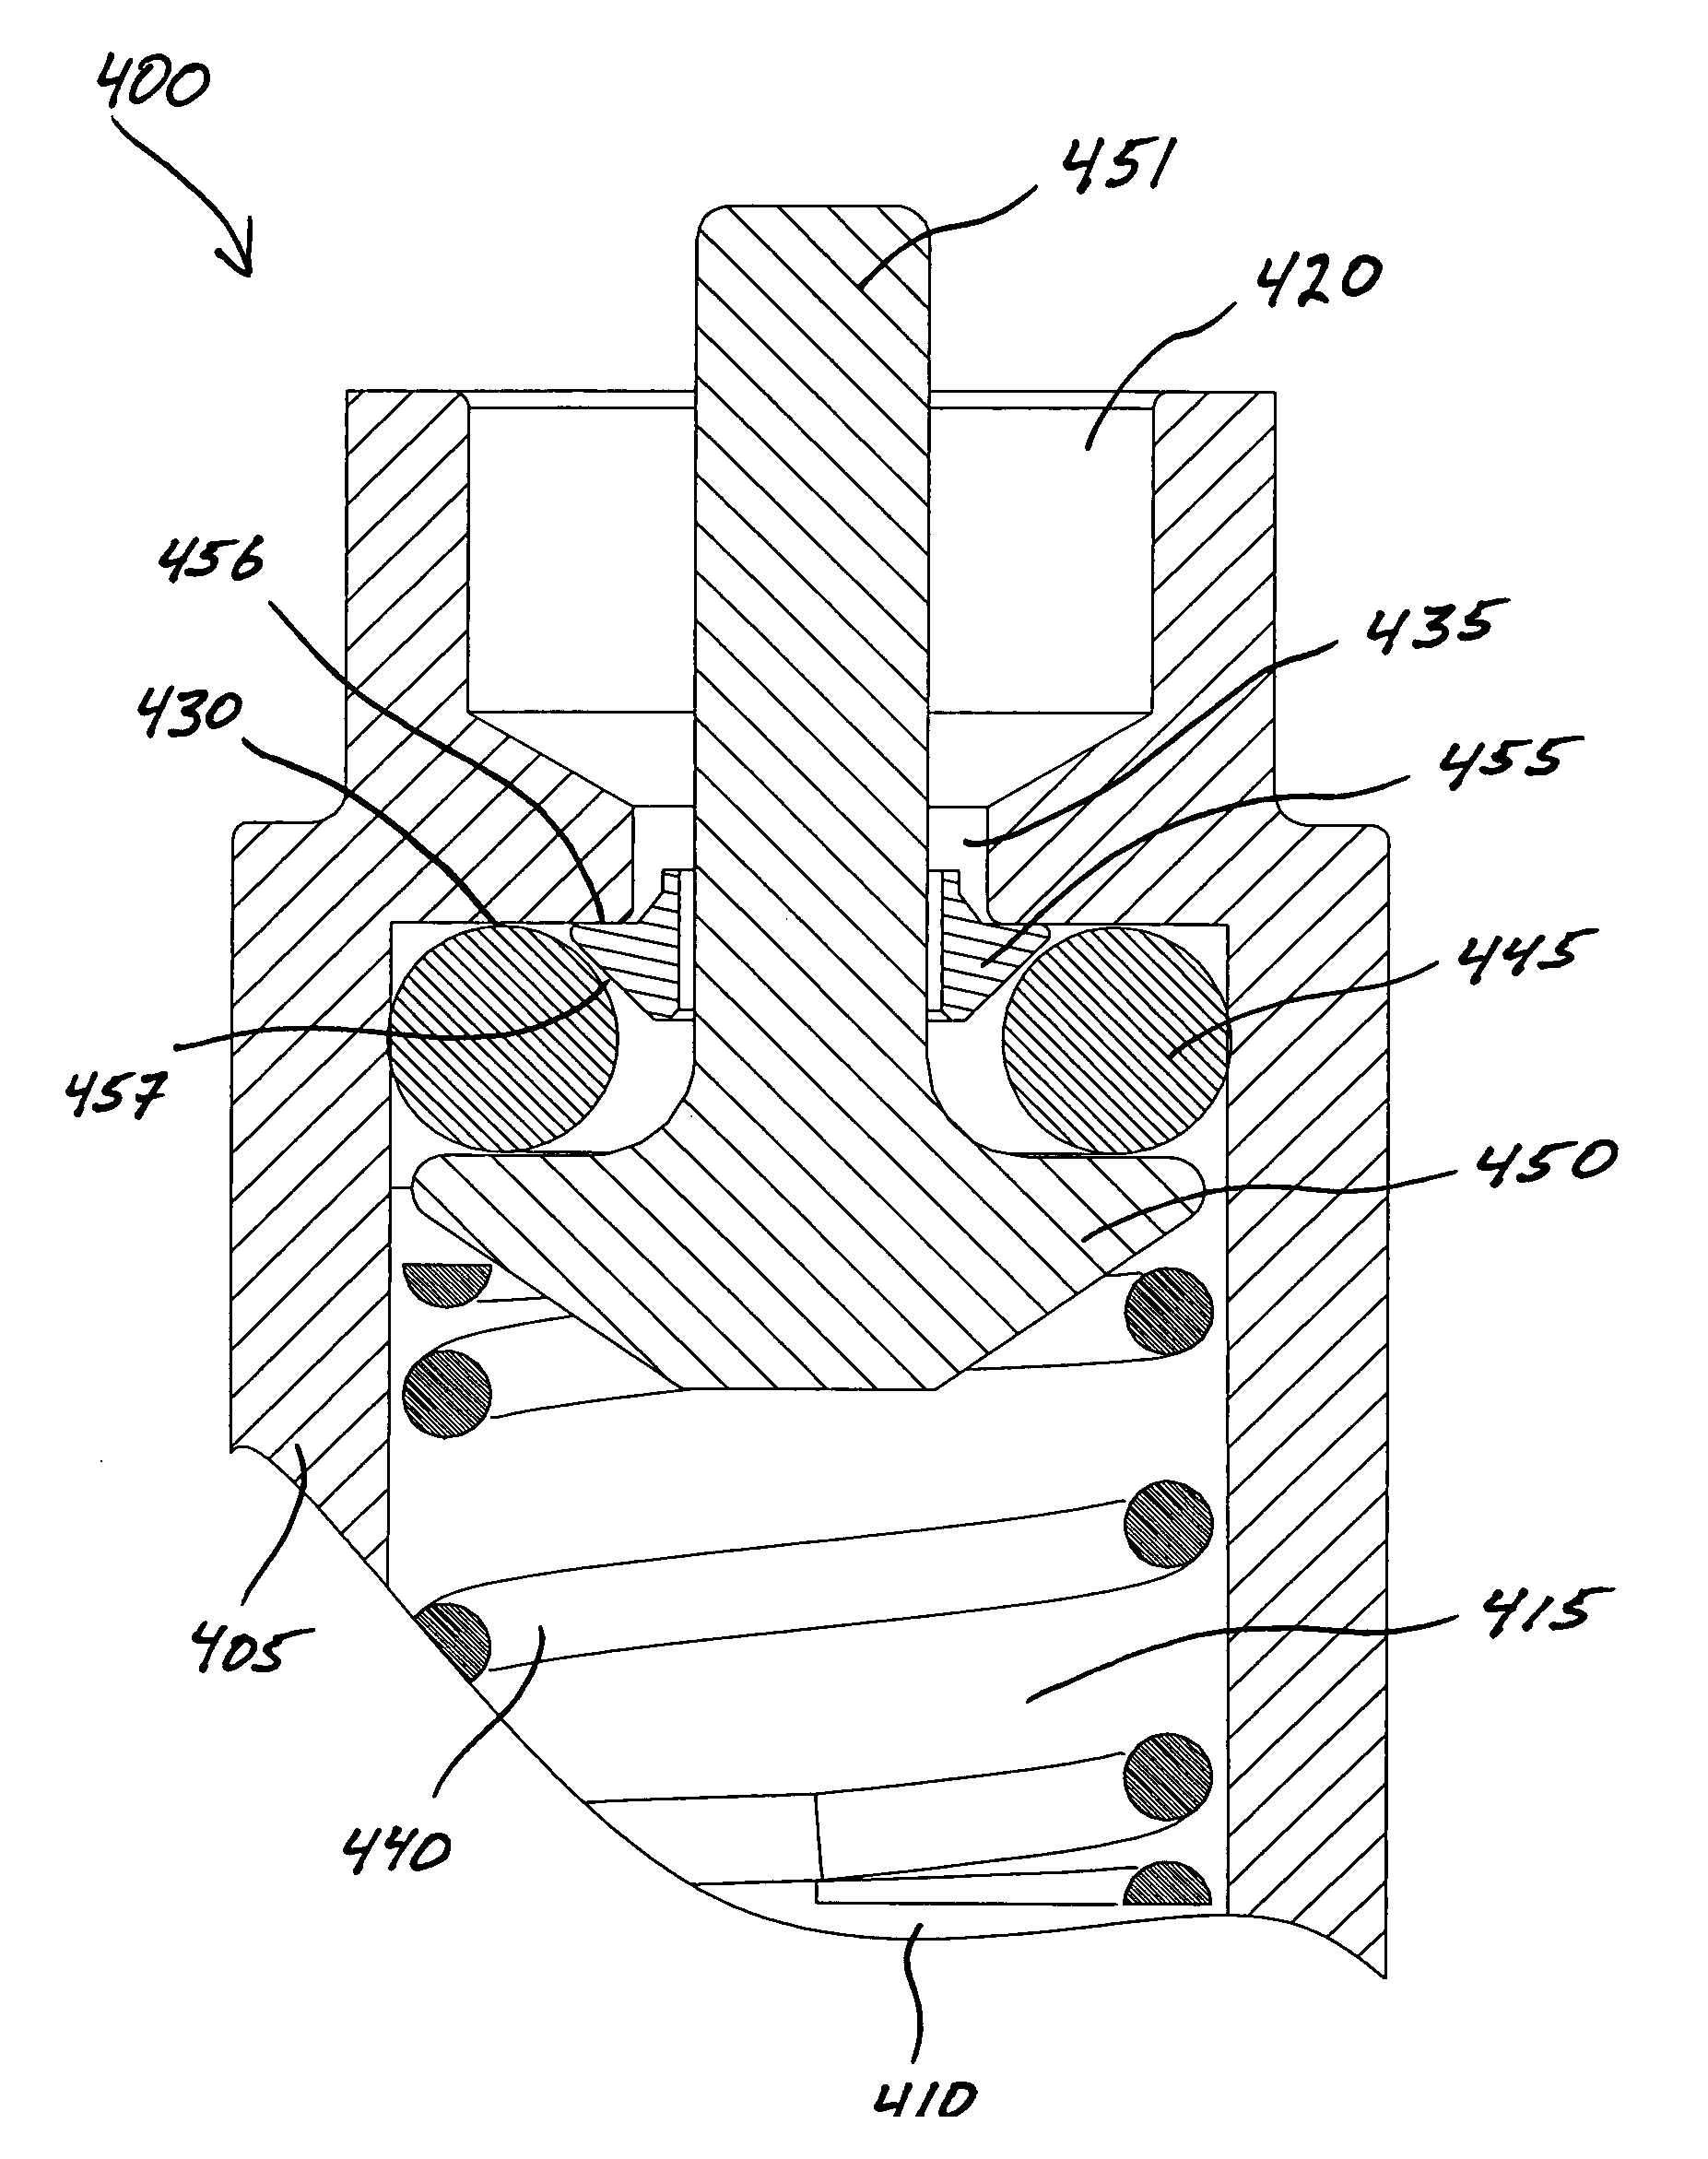 Non-axial actuable valve capable of retaining both high and low pressures